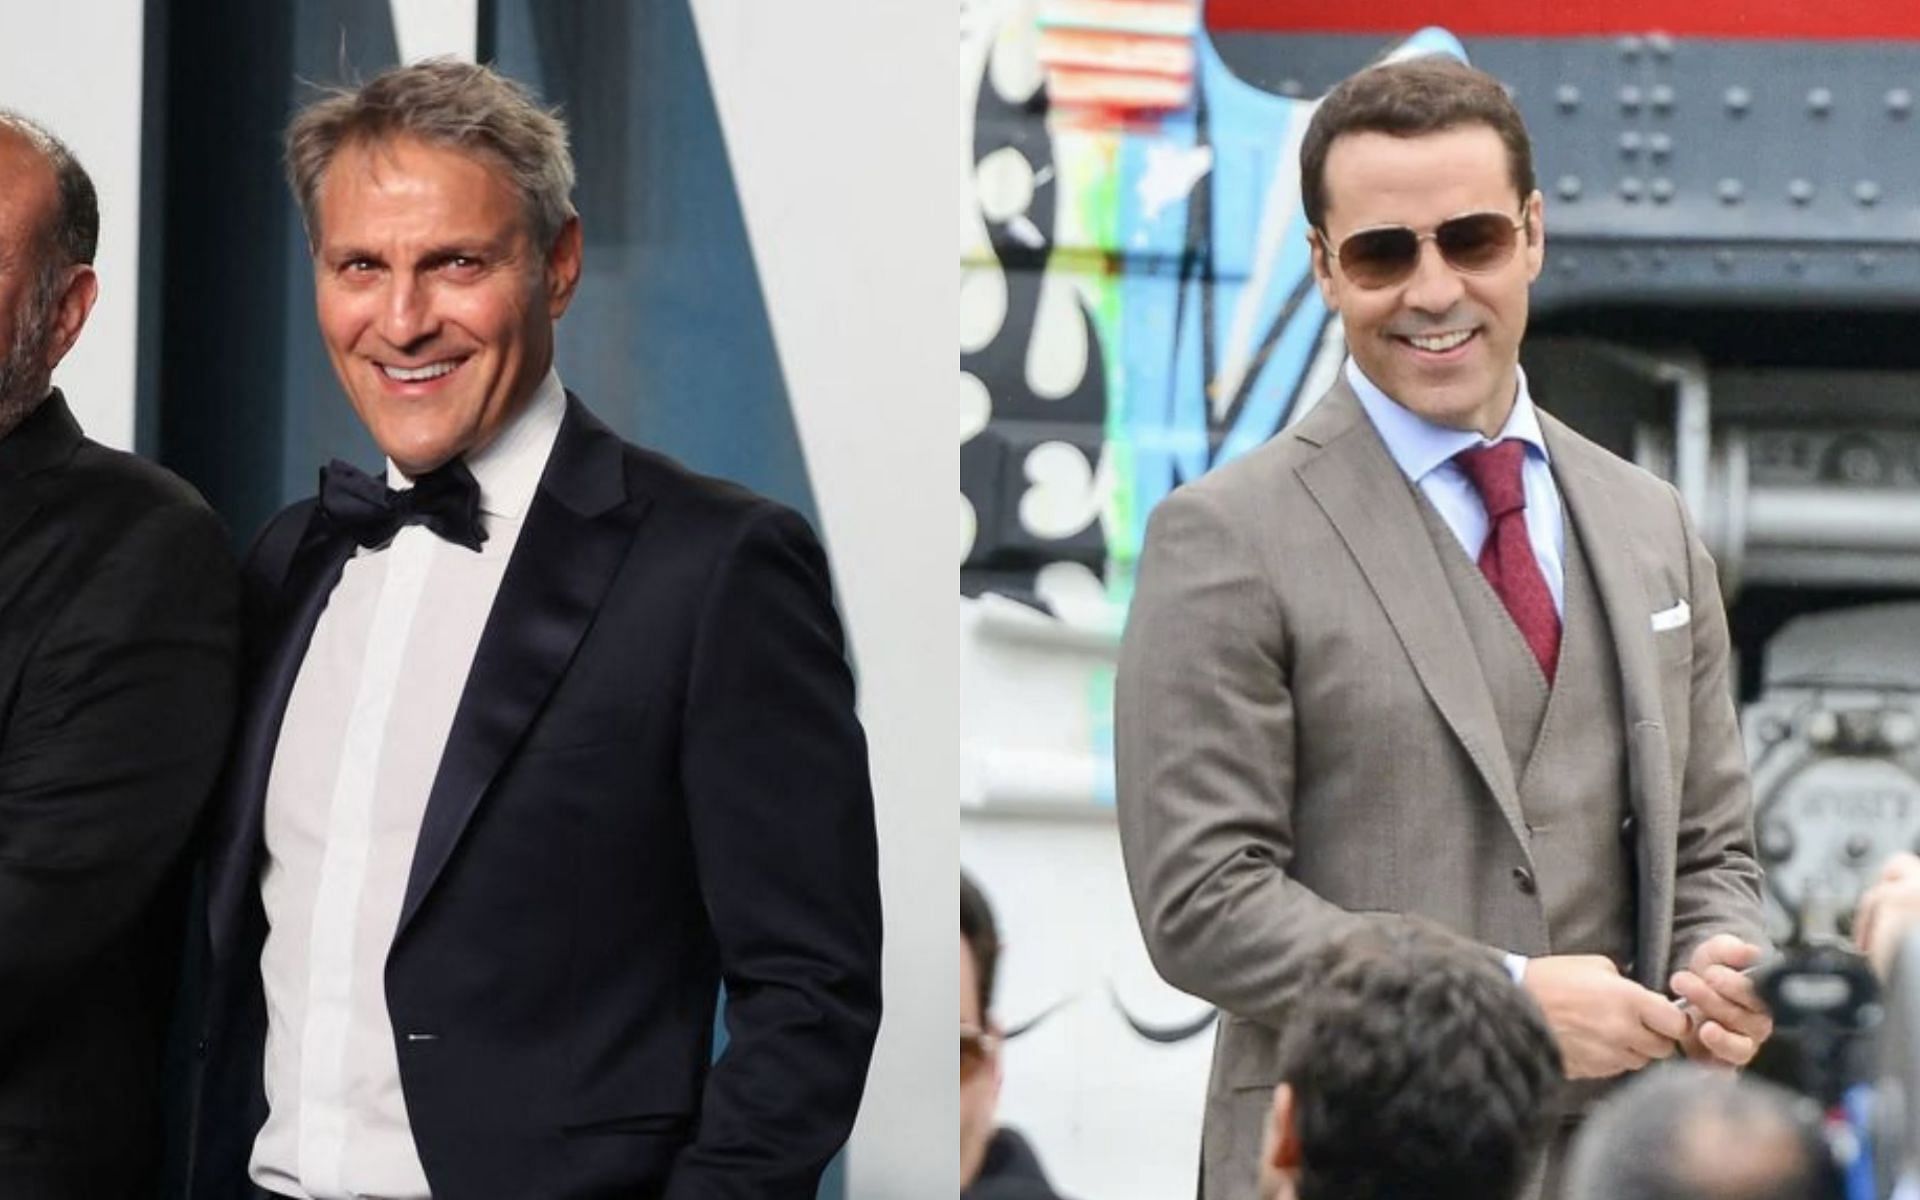 Ari Emanuel [Left] Jeremy Piven as Ari Gold in Entourage [Right] [Images courtesy: www.wsj.com and @RollingStone (Twitter)]